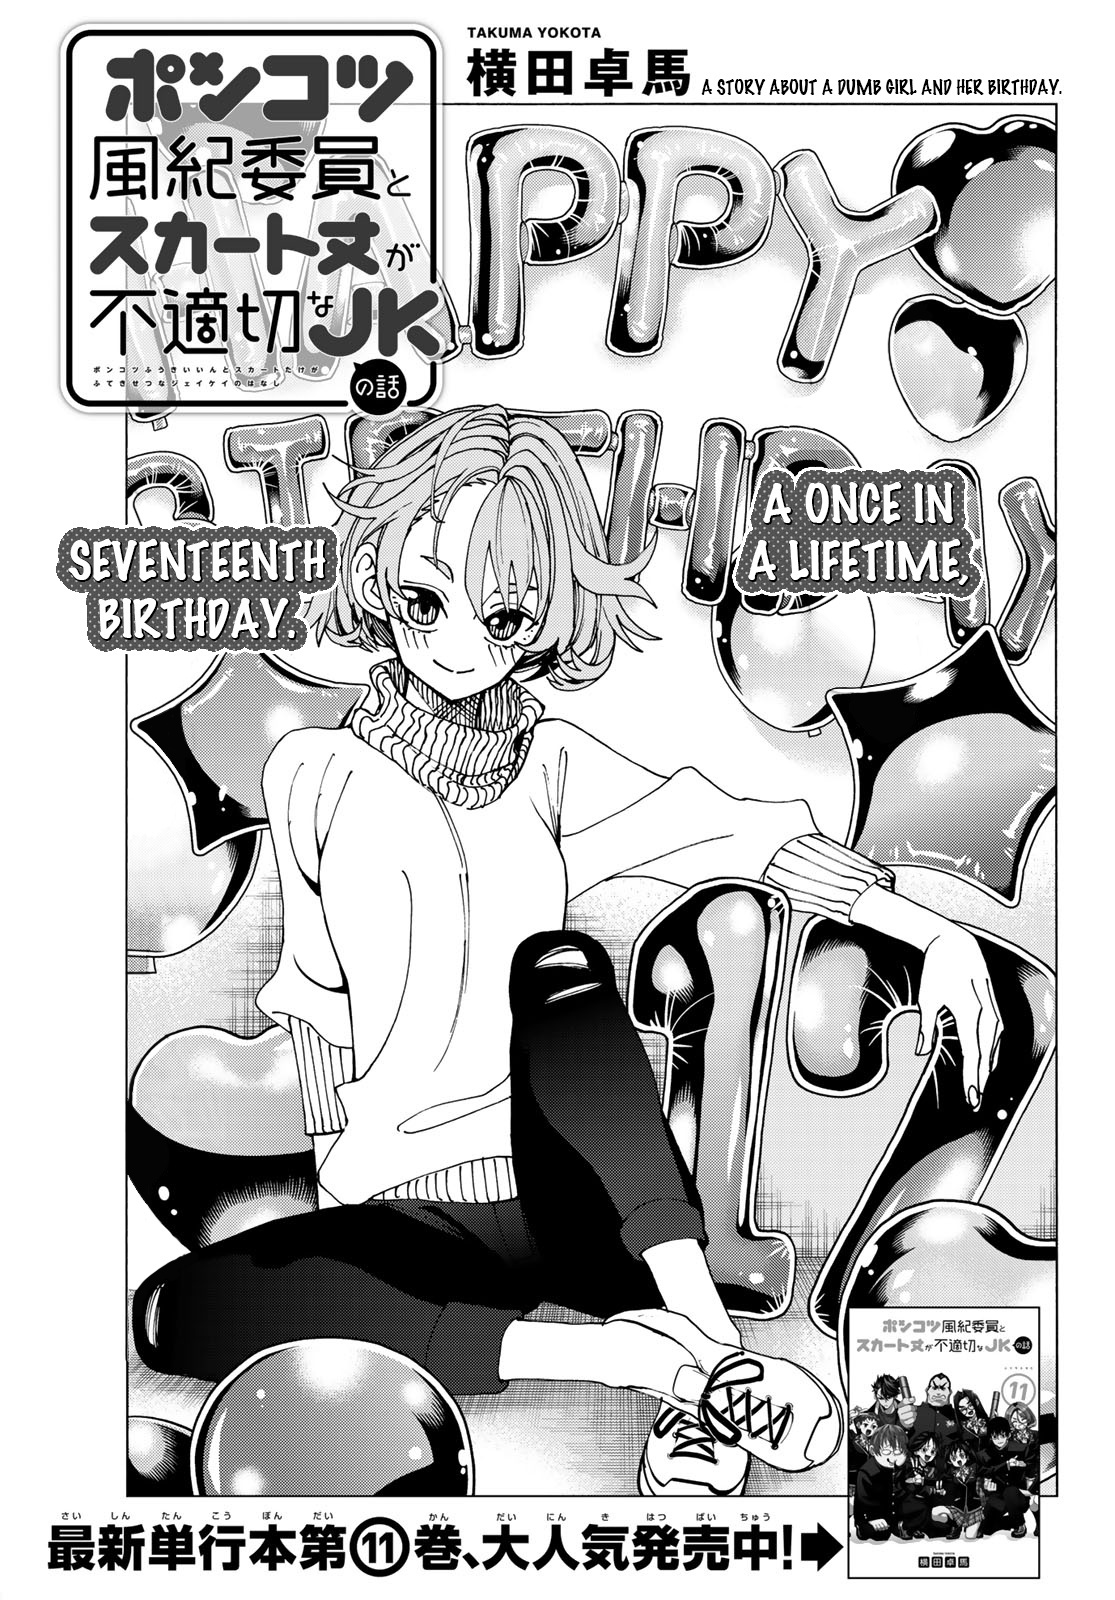 The Story Between A Dumb Prefect And A High School Girl With An Inappropriate Skirt Length Chapter 58: A Story About A Dumb Girl And Her Birthday - Picture 1